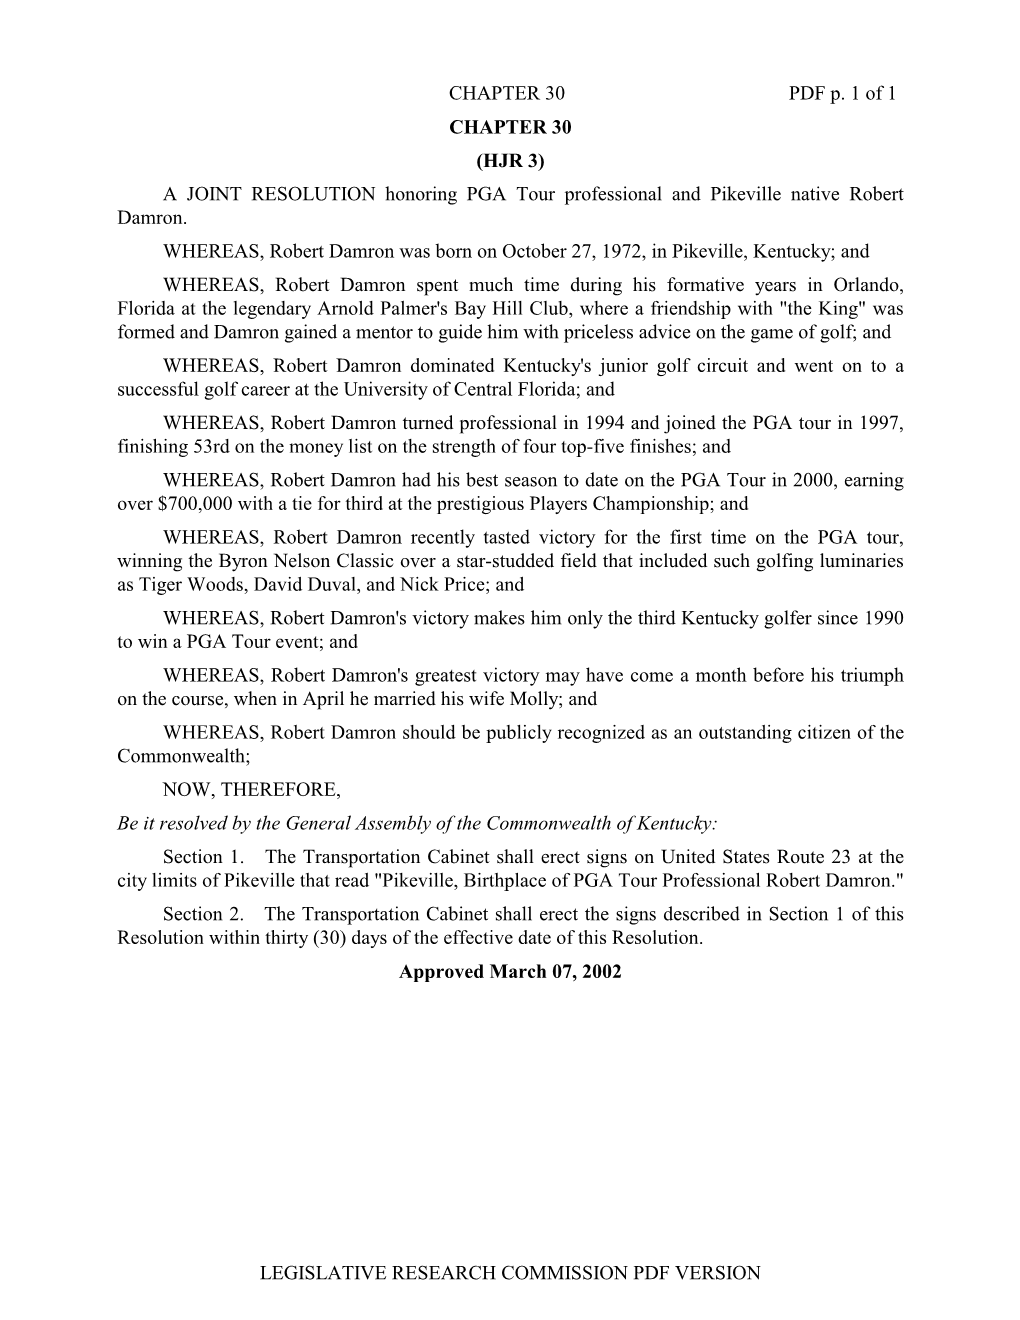 HJR 3) a JOINT RESOLUTION Honoring PGA Tour Professional and Pikeville Native Robert Damron